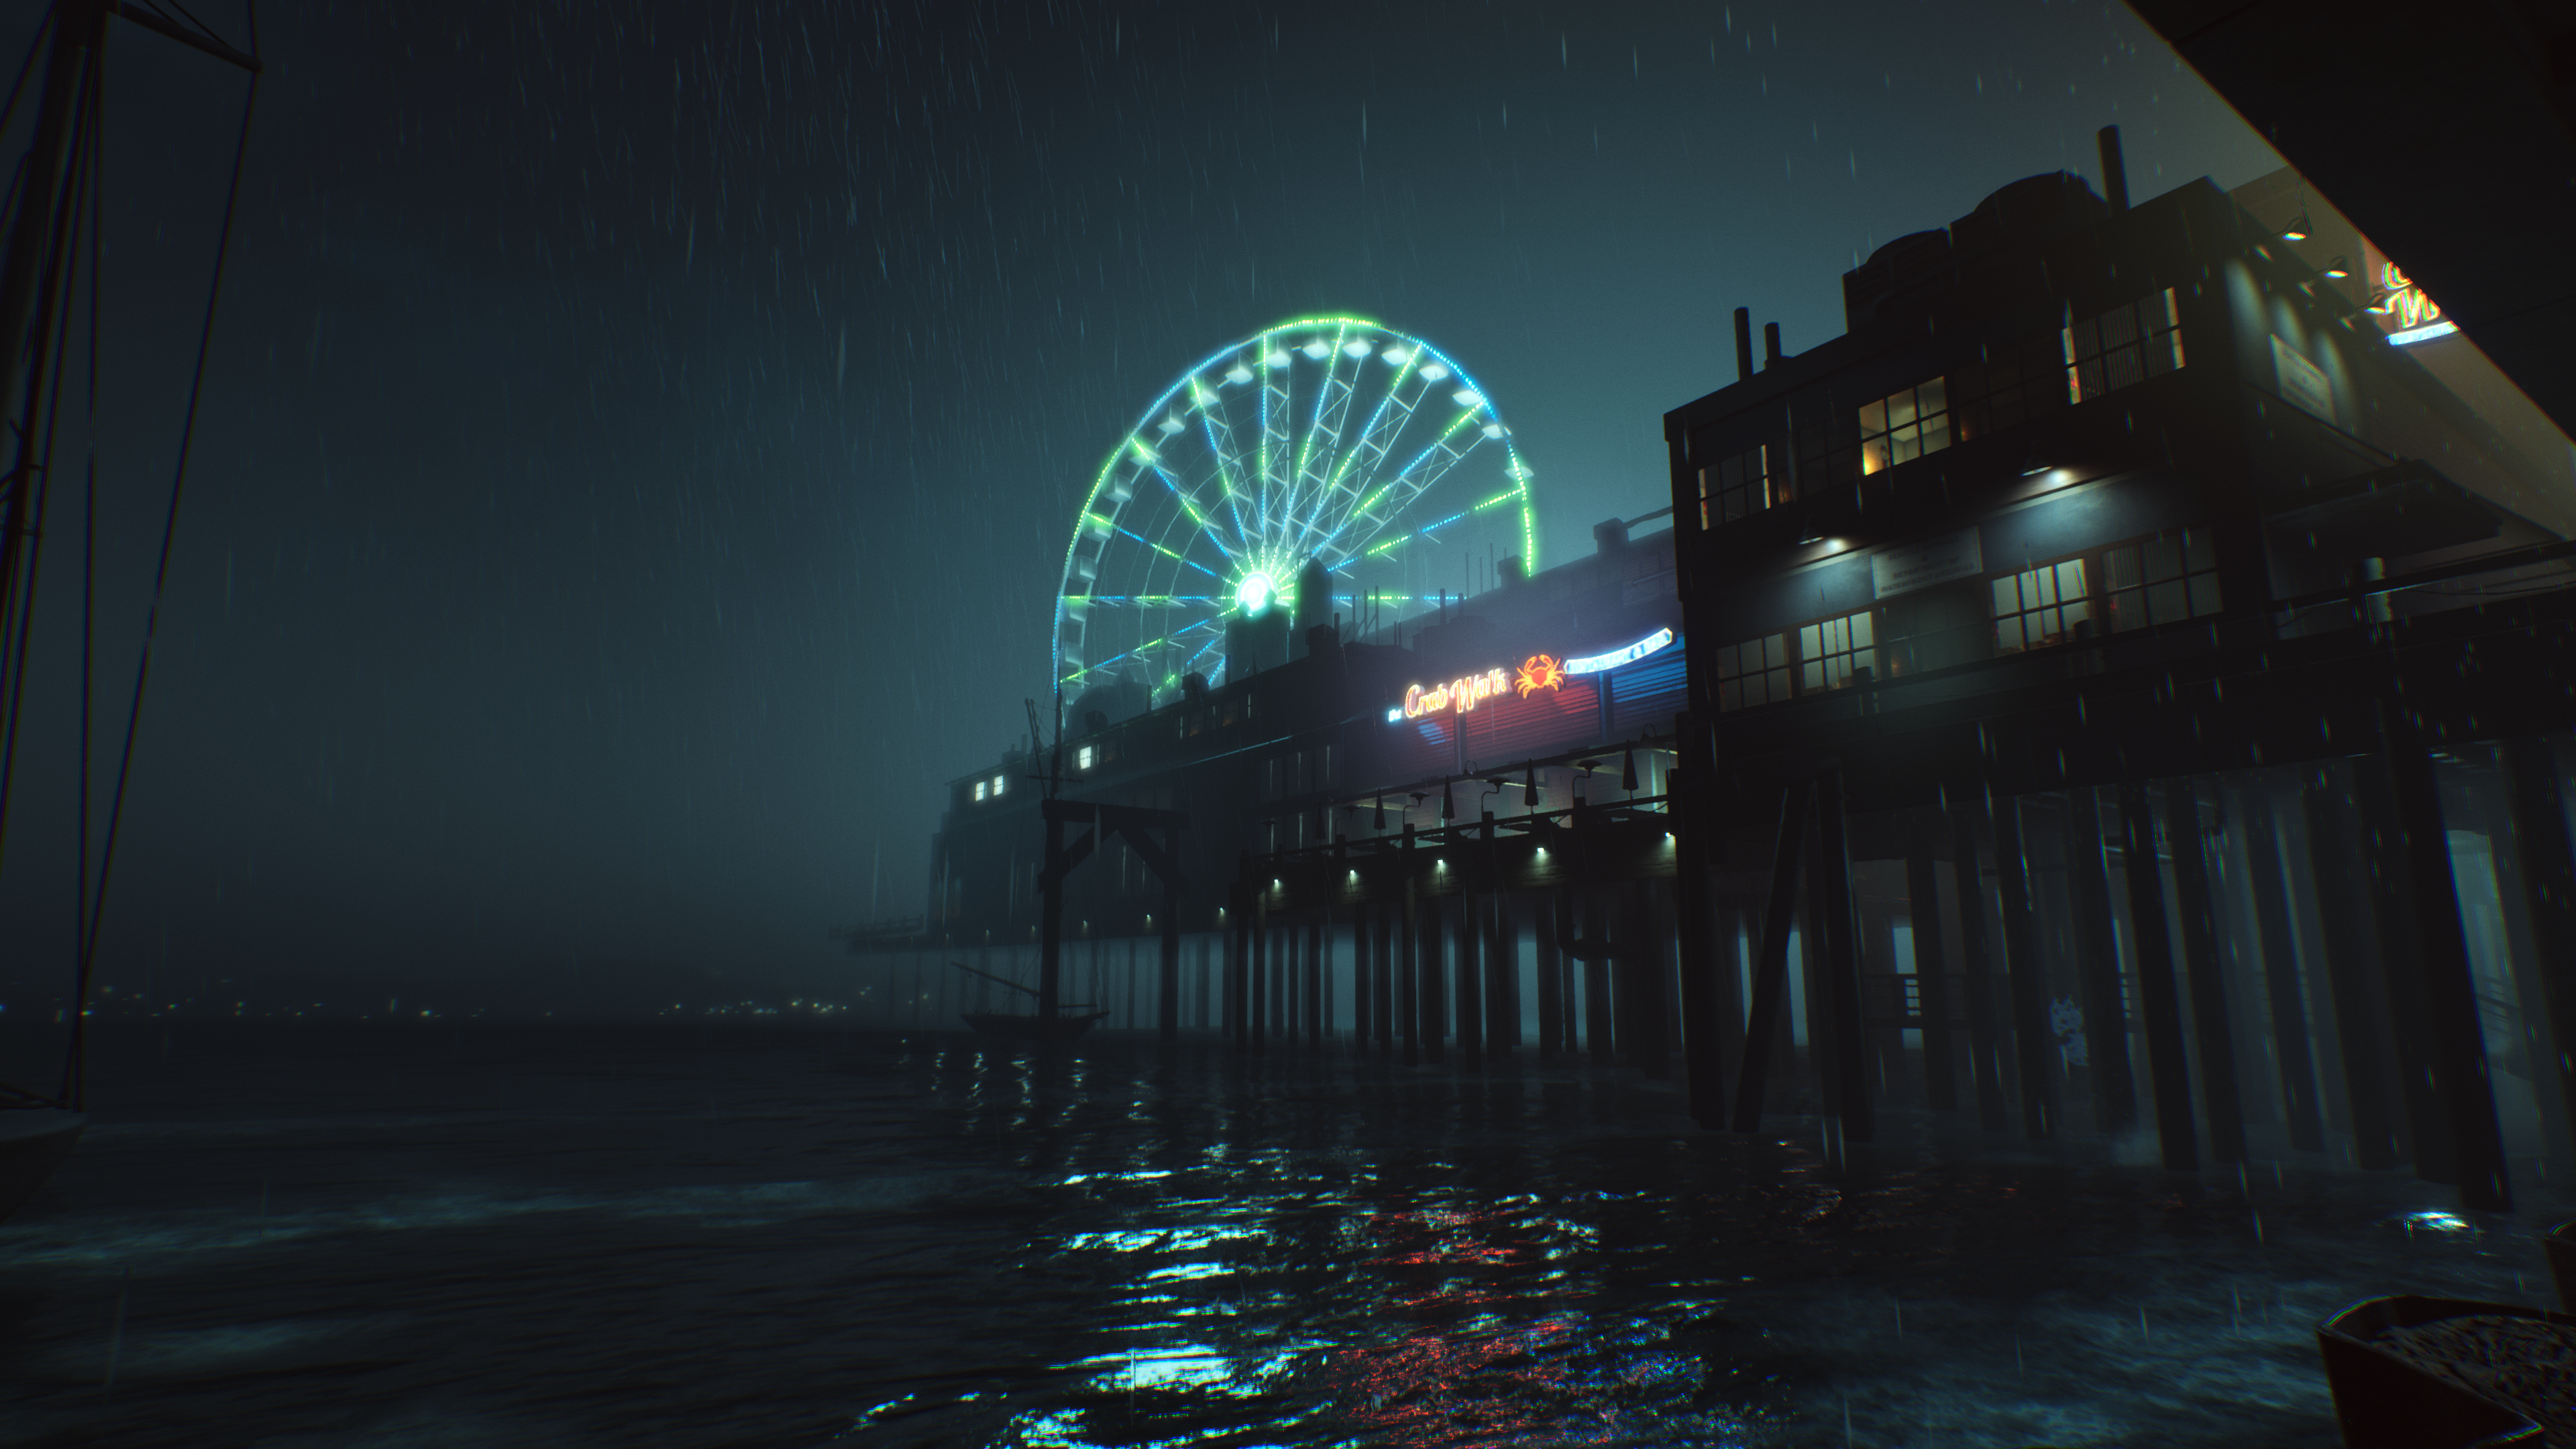 What is the release date of Vampire: The Masquerade- Bloodlines 2? - Gamepur